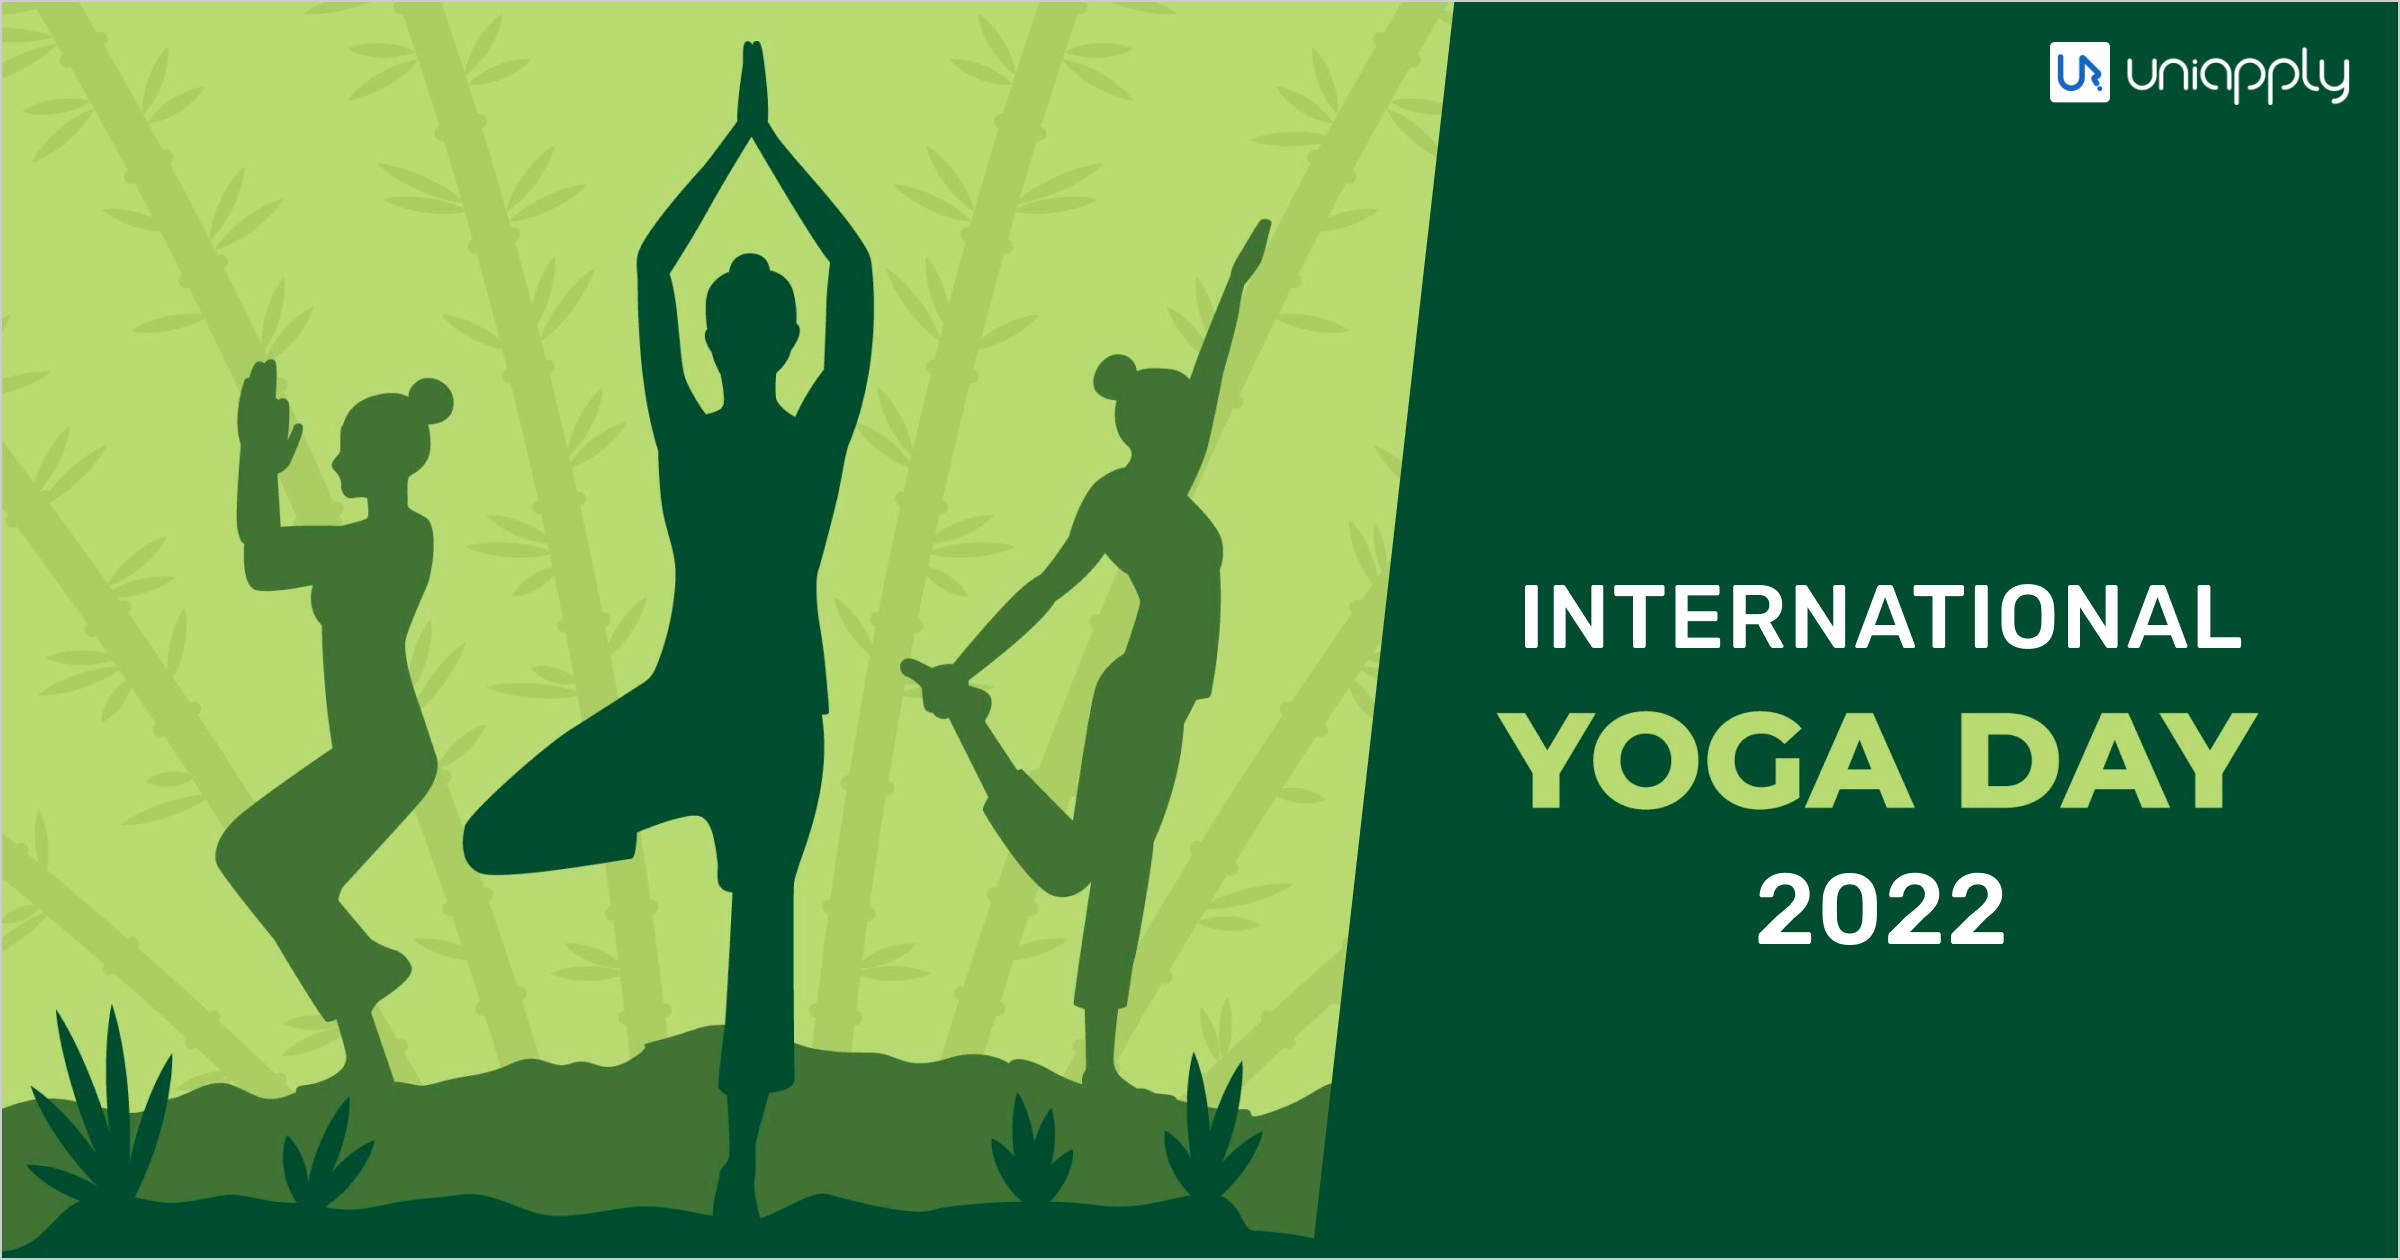 Celebrate International Yoga Day At Work With This Fun Yoga Routine